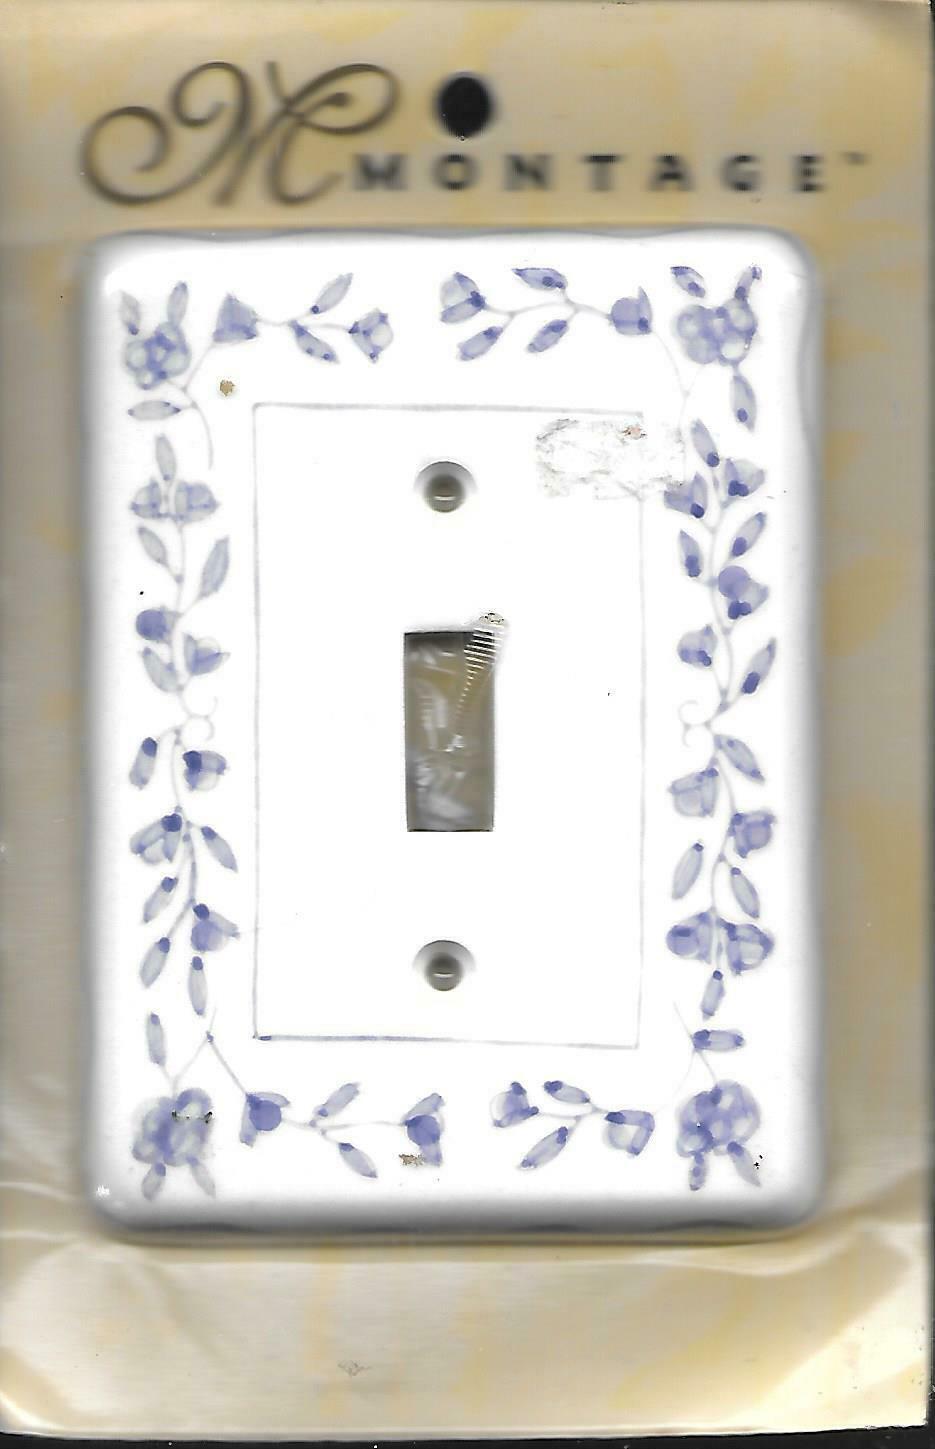 Primary image for Montage Porcelain Single Switch Plate Cover - Blue & White Flowers - NIP